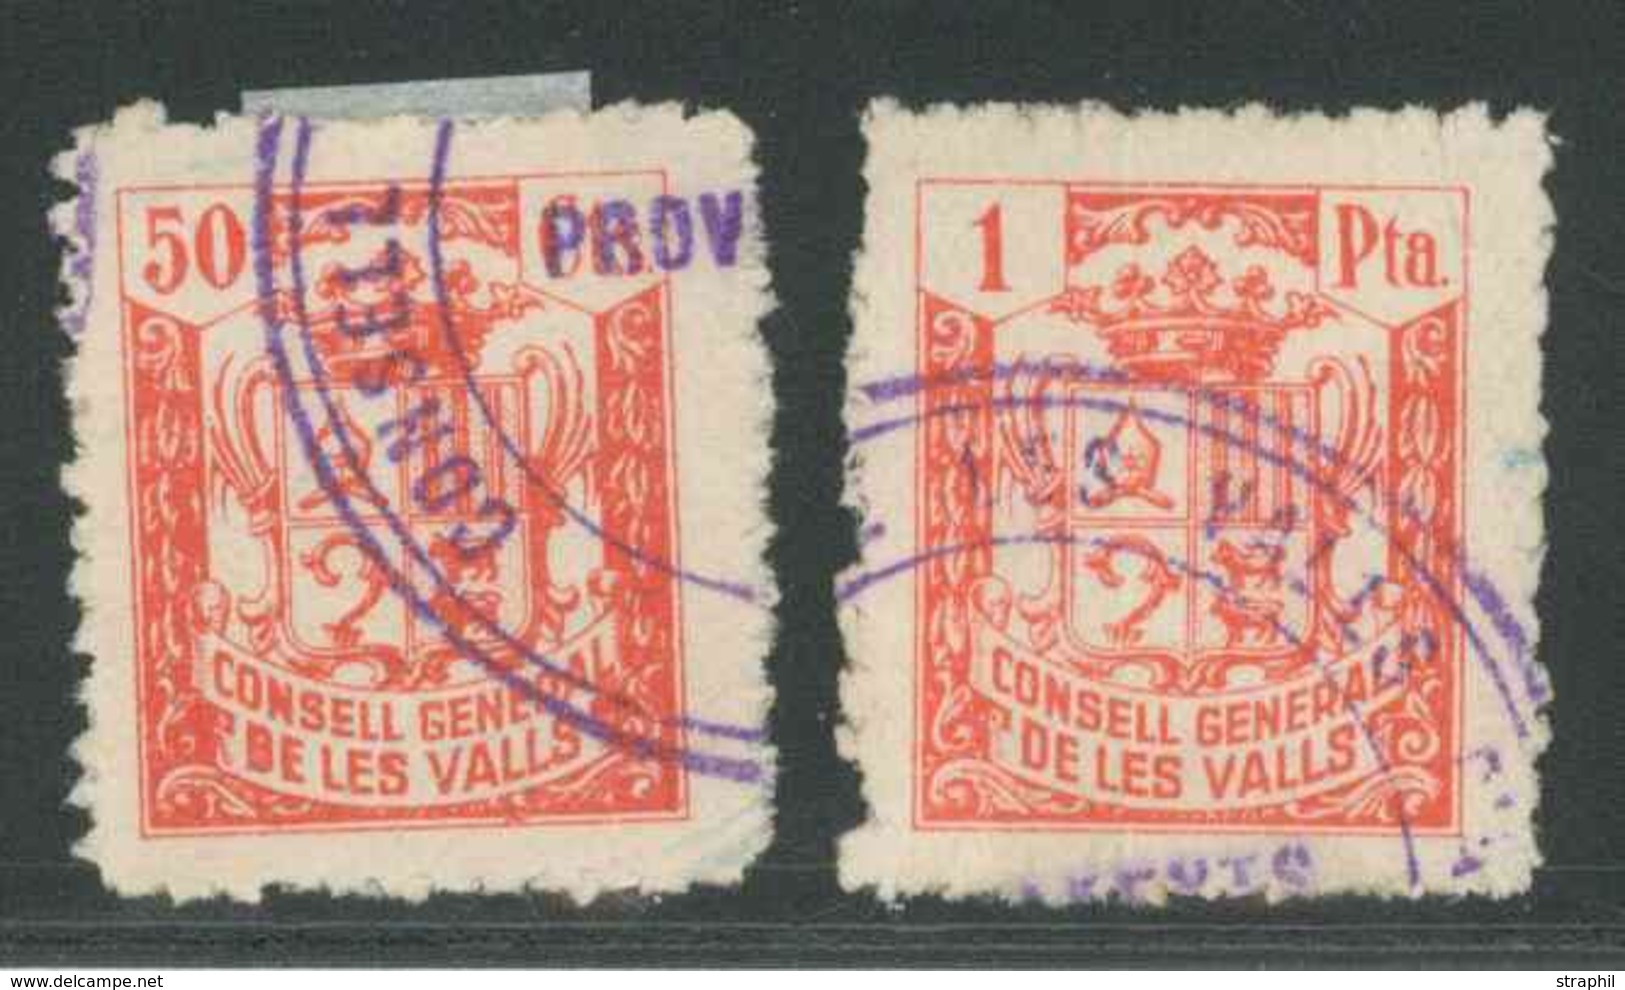 O TIMBRES FISCAUX - O - N°3832/33 - 50c Et 1p Rouge - Taxe D'Hostellerie - Obl. Grd Cachet Violet - TB - Used Stamps